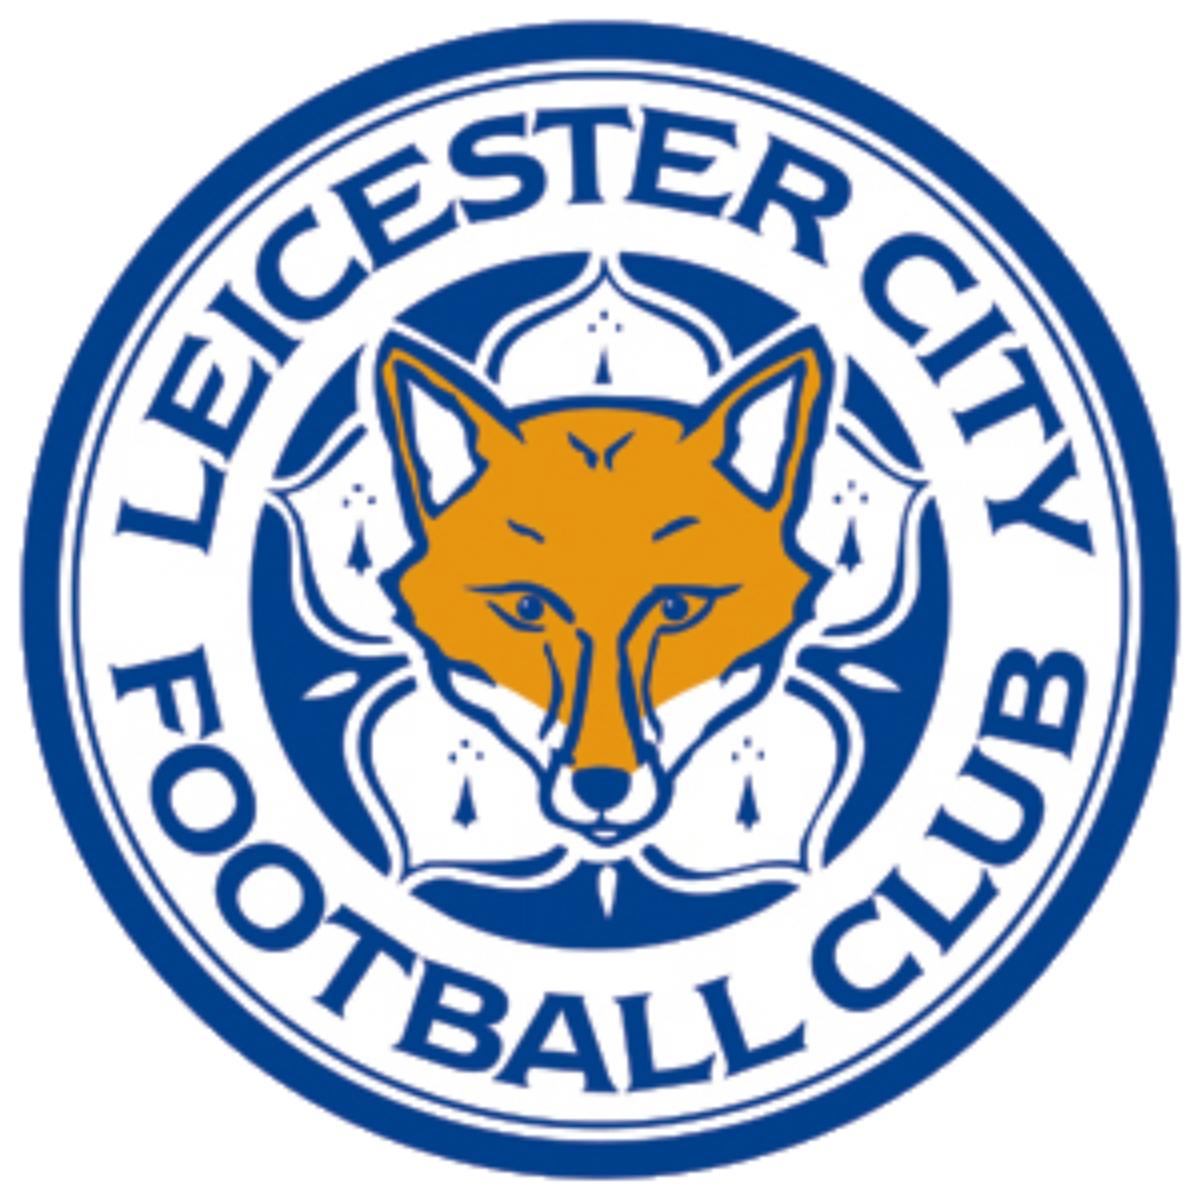 leicester city f.c.